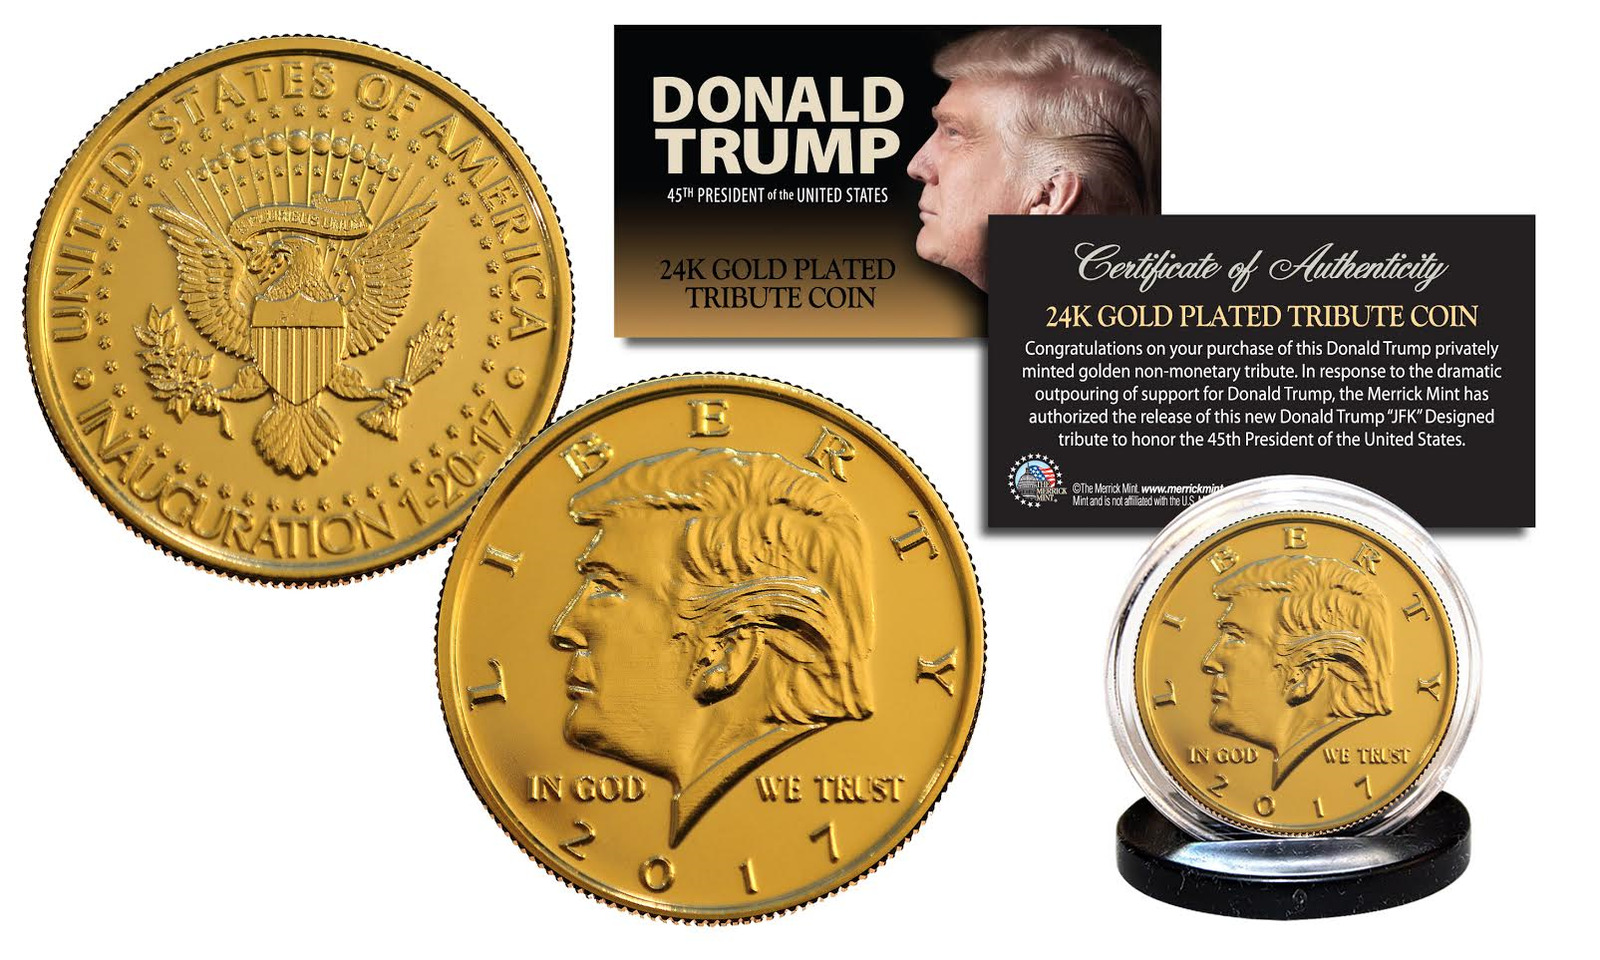 2017 DONALD TRUMP OFFICIAL Inauguration 24K Gold Plated 12 GRAMS Tribute Coin